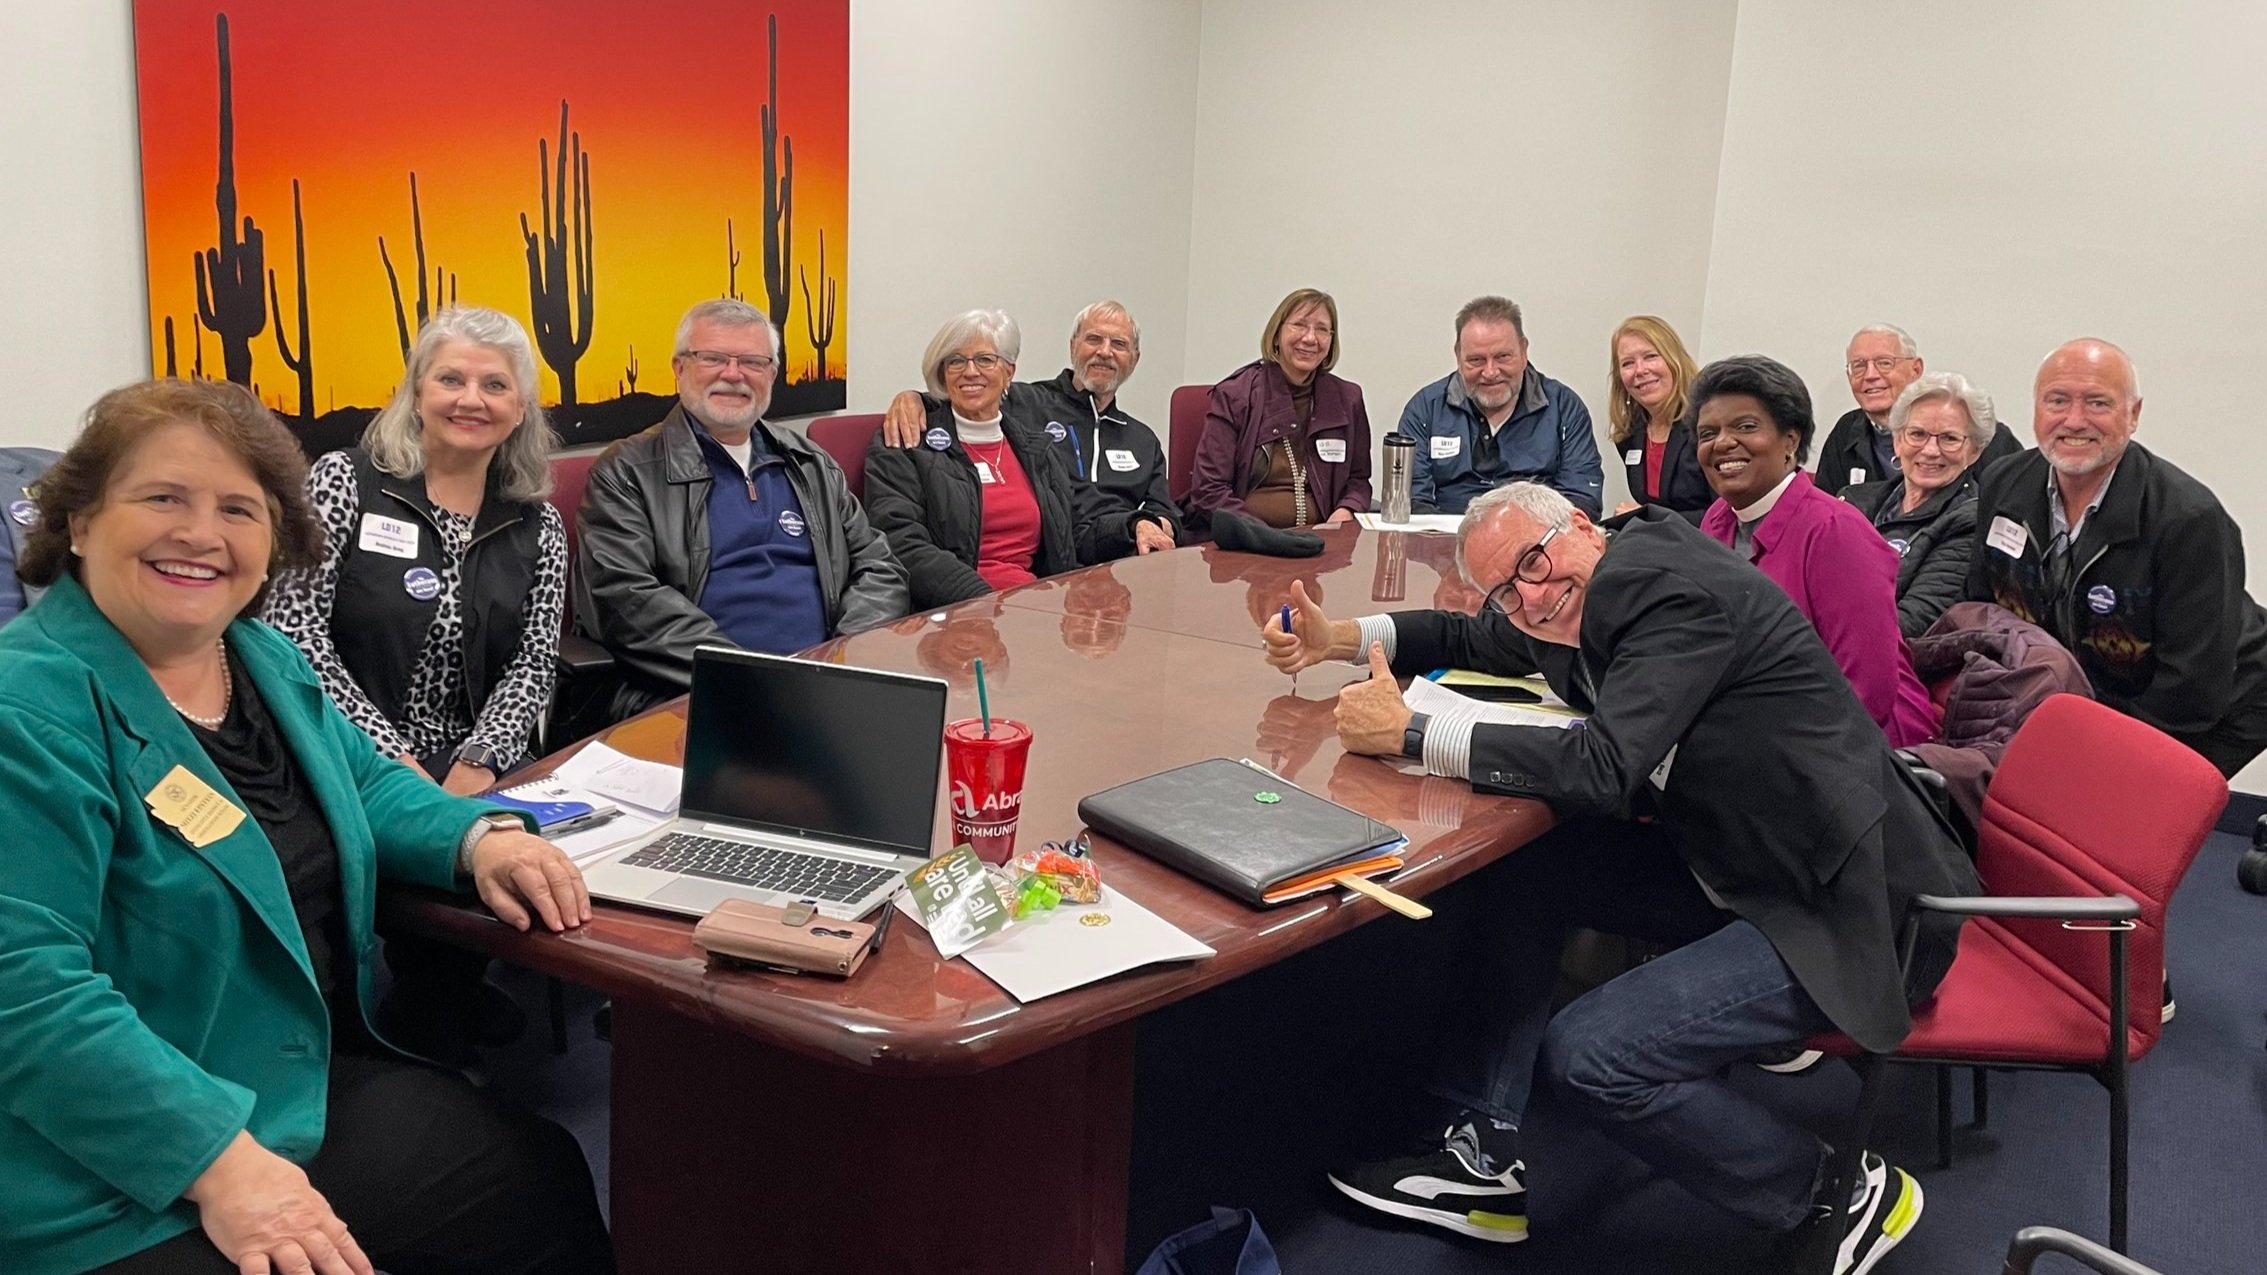  The LD12 Contingent: From left to right: Sen. Mitzi Epstein, Andrea Arey, … Elaine Kraemer, Pr. Steve Holm, Jayne Peterson, friend, Janie Magruder (LSS-SW board member), Jim Gisselquist and Jane Gisselquist (Esperanza, Ahwatukee), Tim Perlick, Pr. J